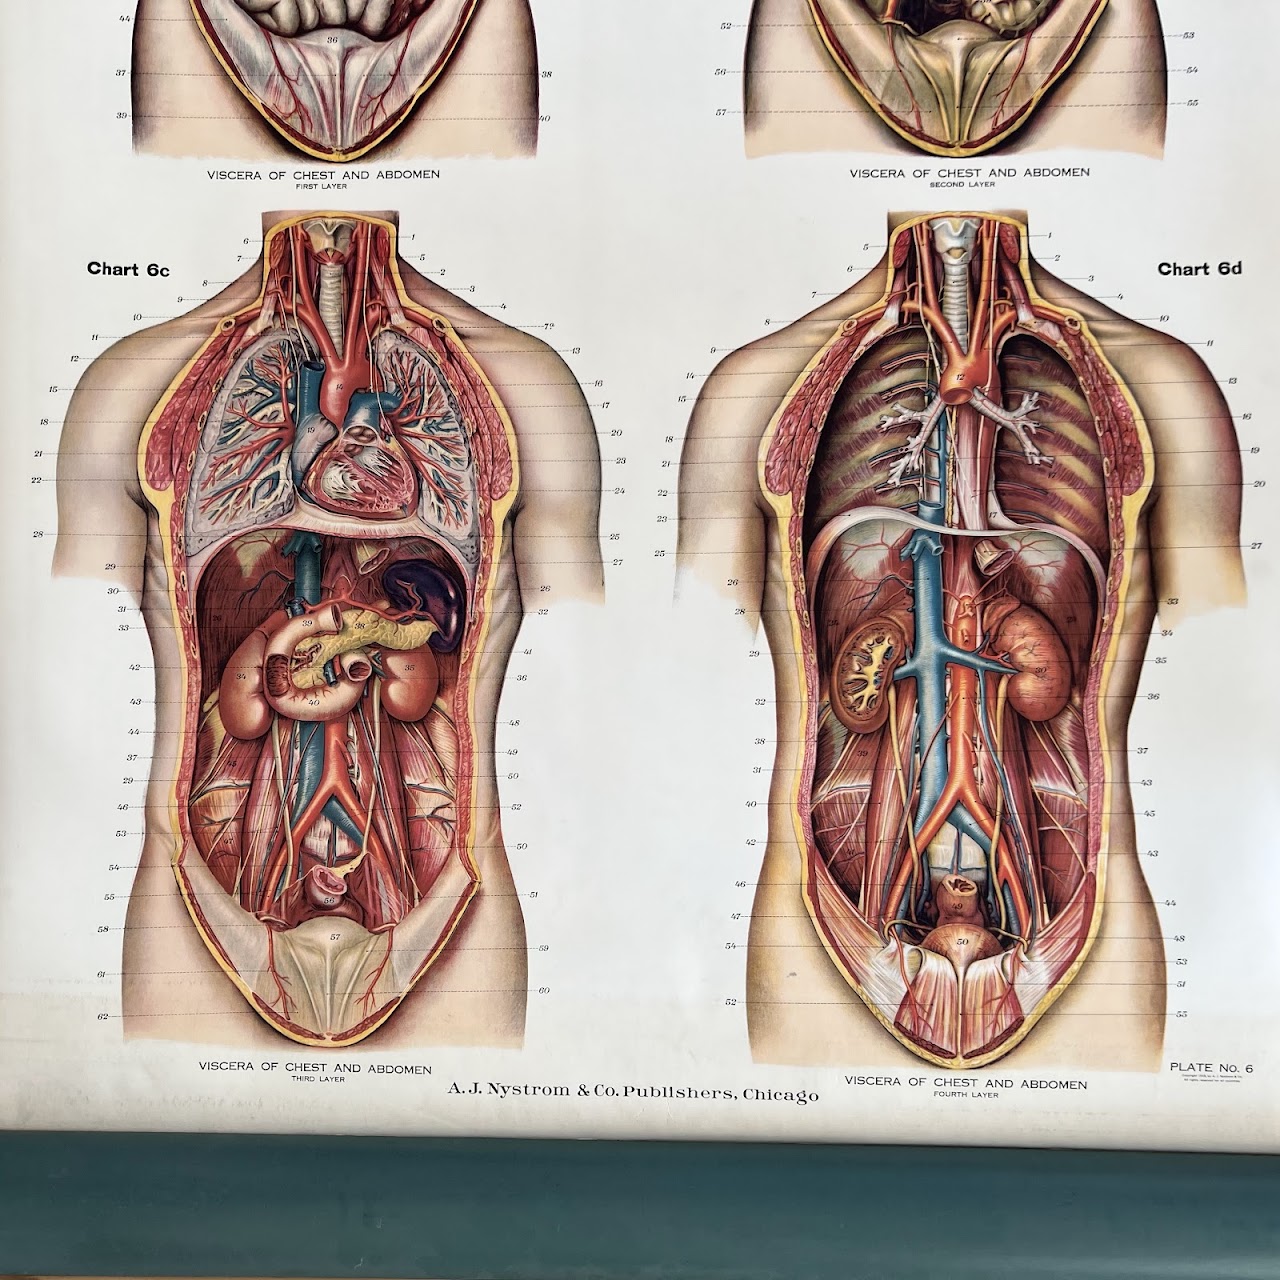 American Frohse Max Brodel Thoracic and Abdominal Viscera Anatomy Chart, 1918